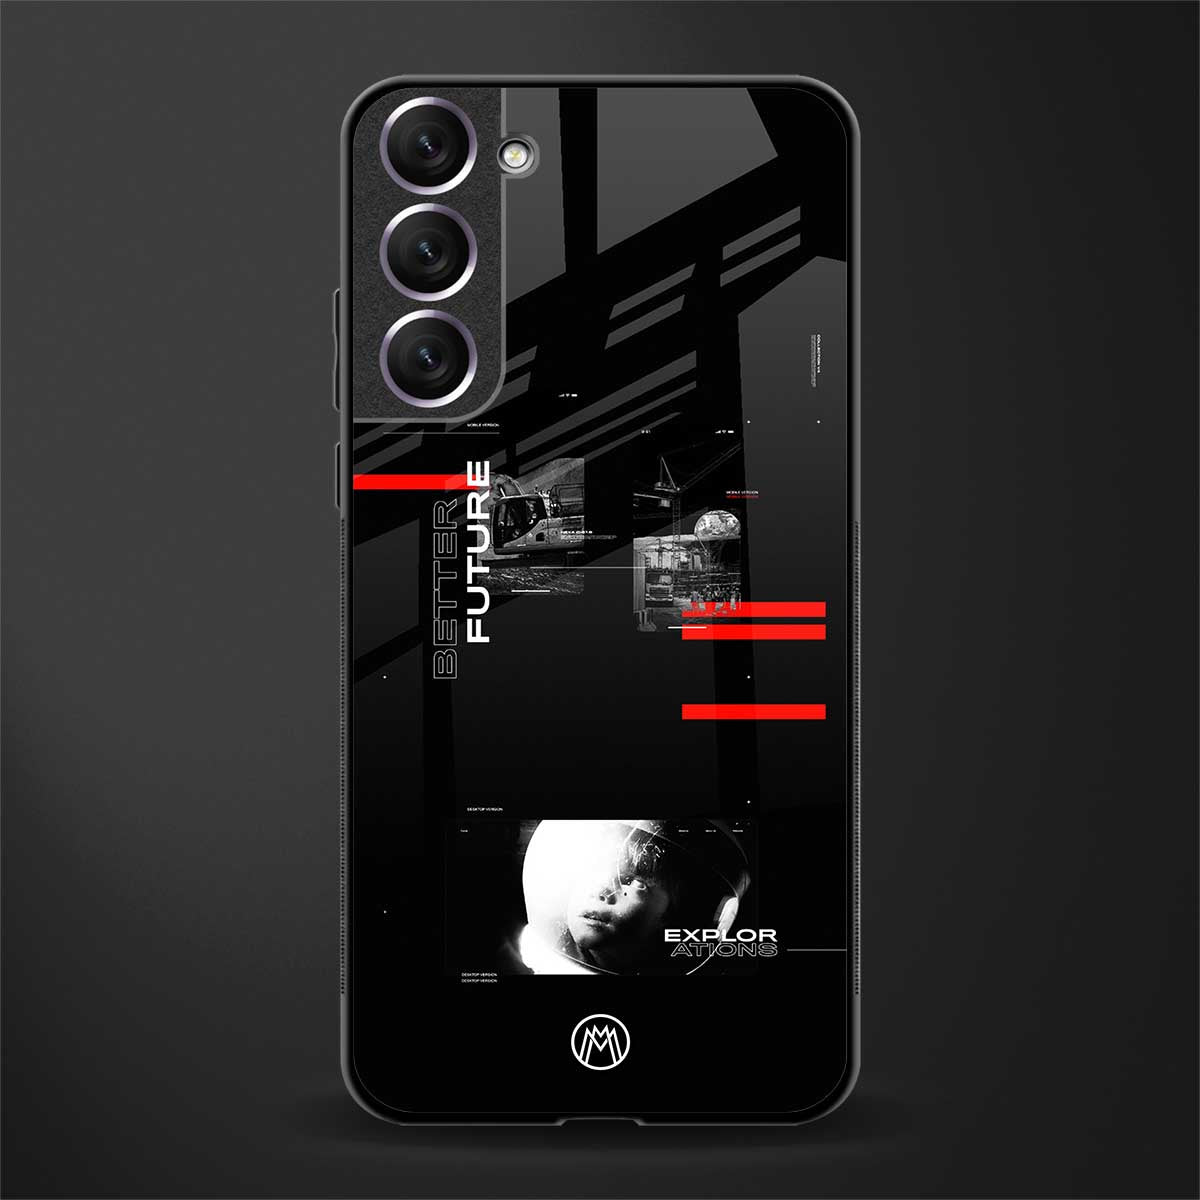 better future dark aesthetic glass case for samsung galaxy s21 fe 5g image